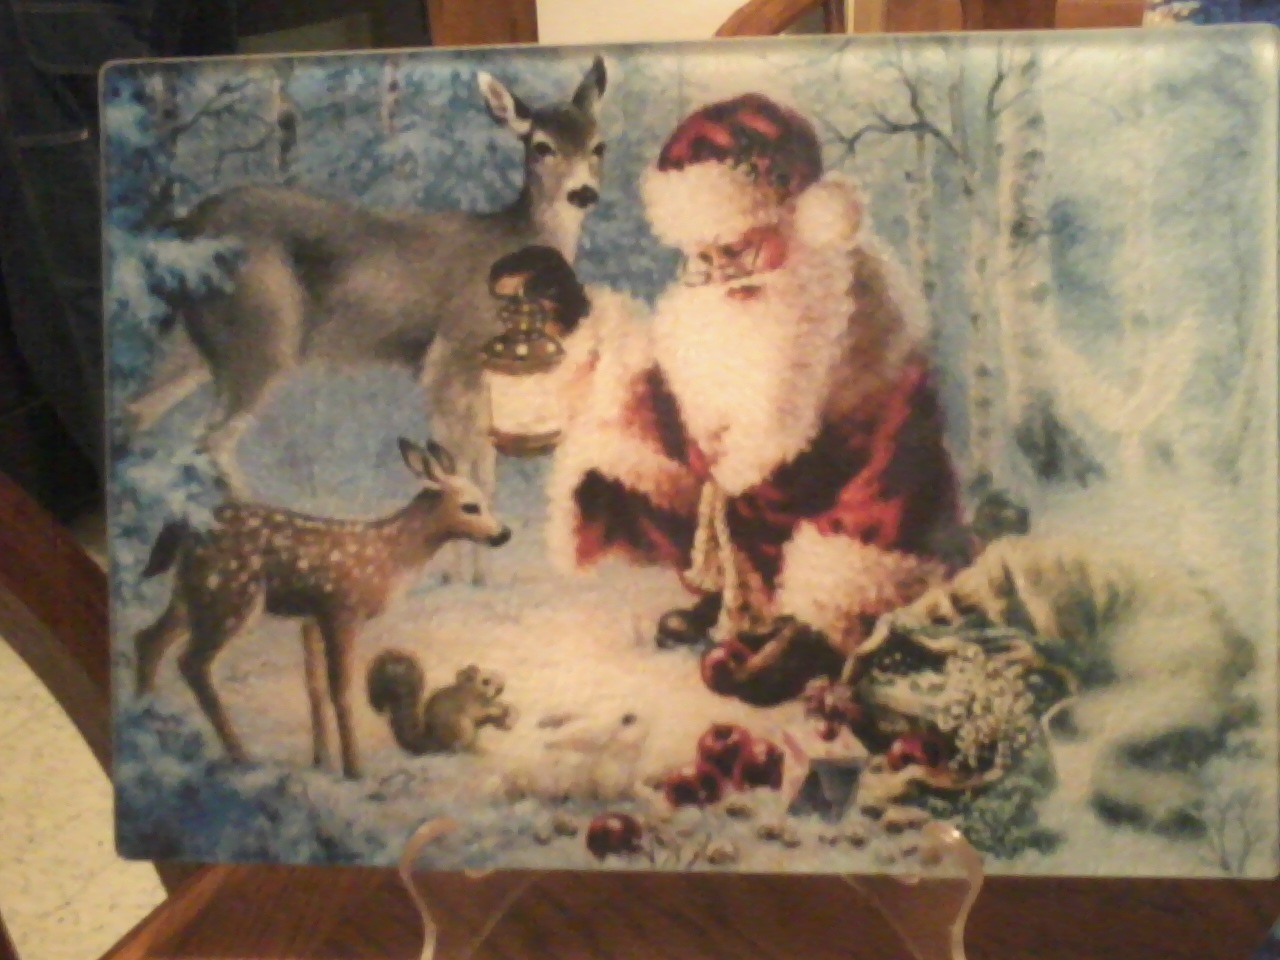 holiday cutting boards made with sublimation printing